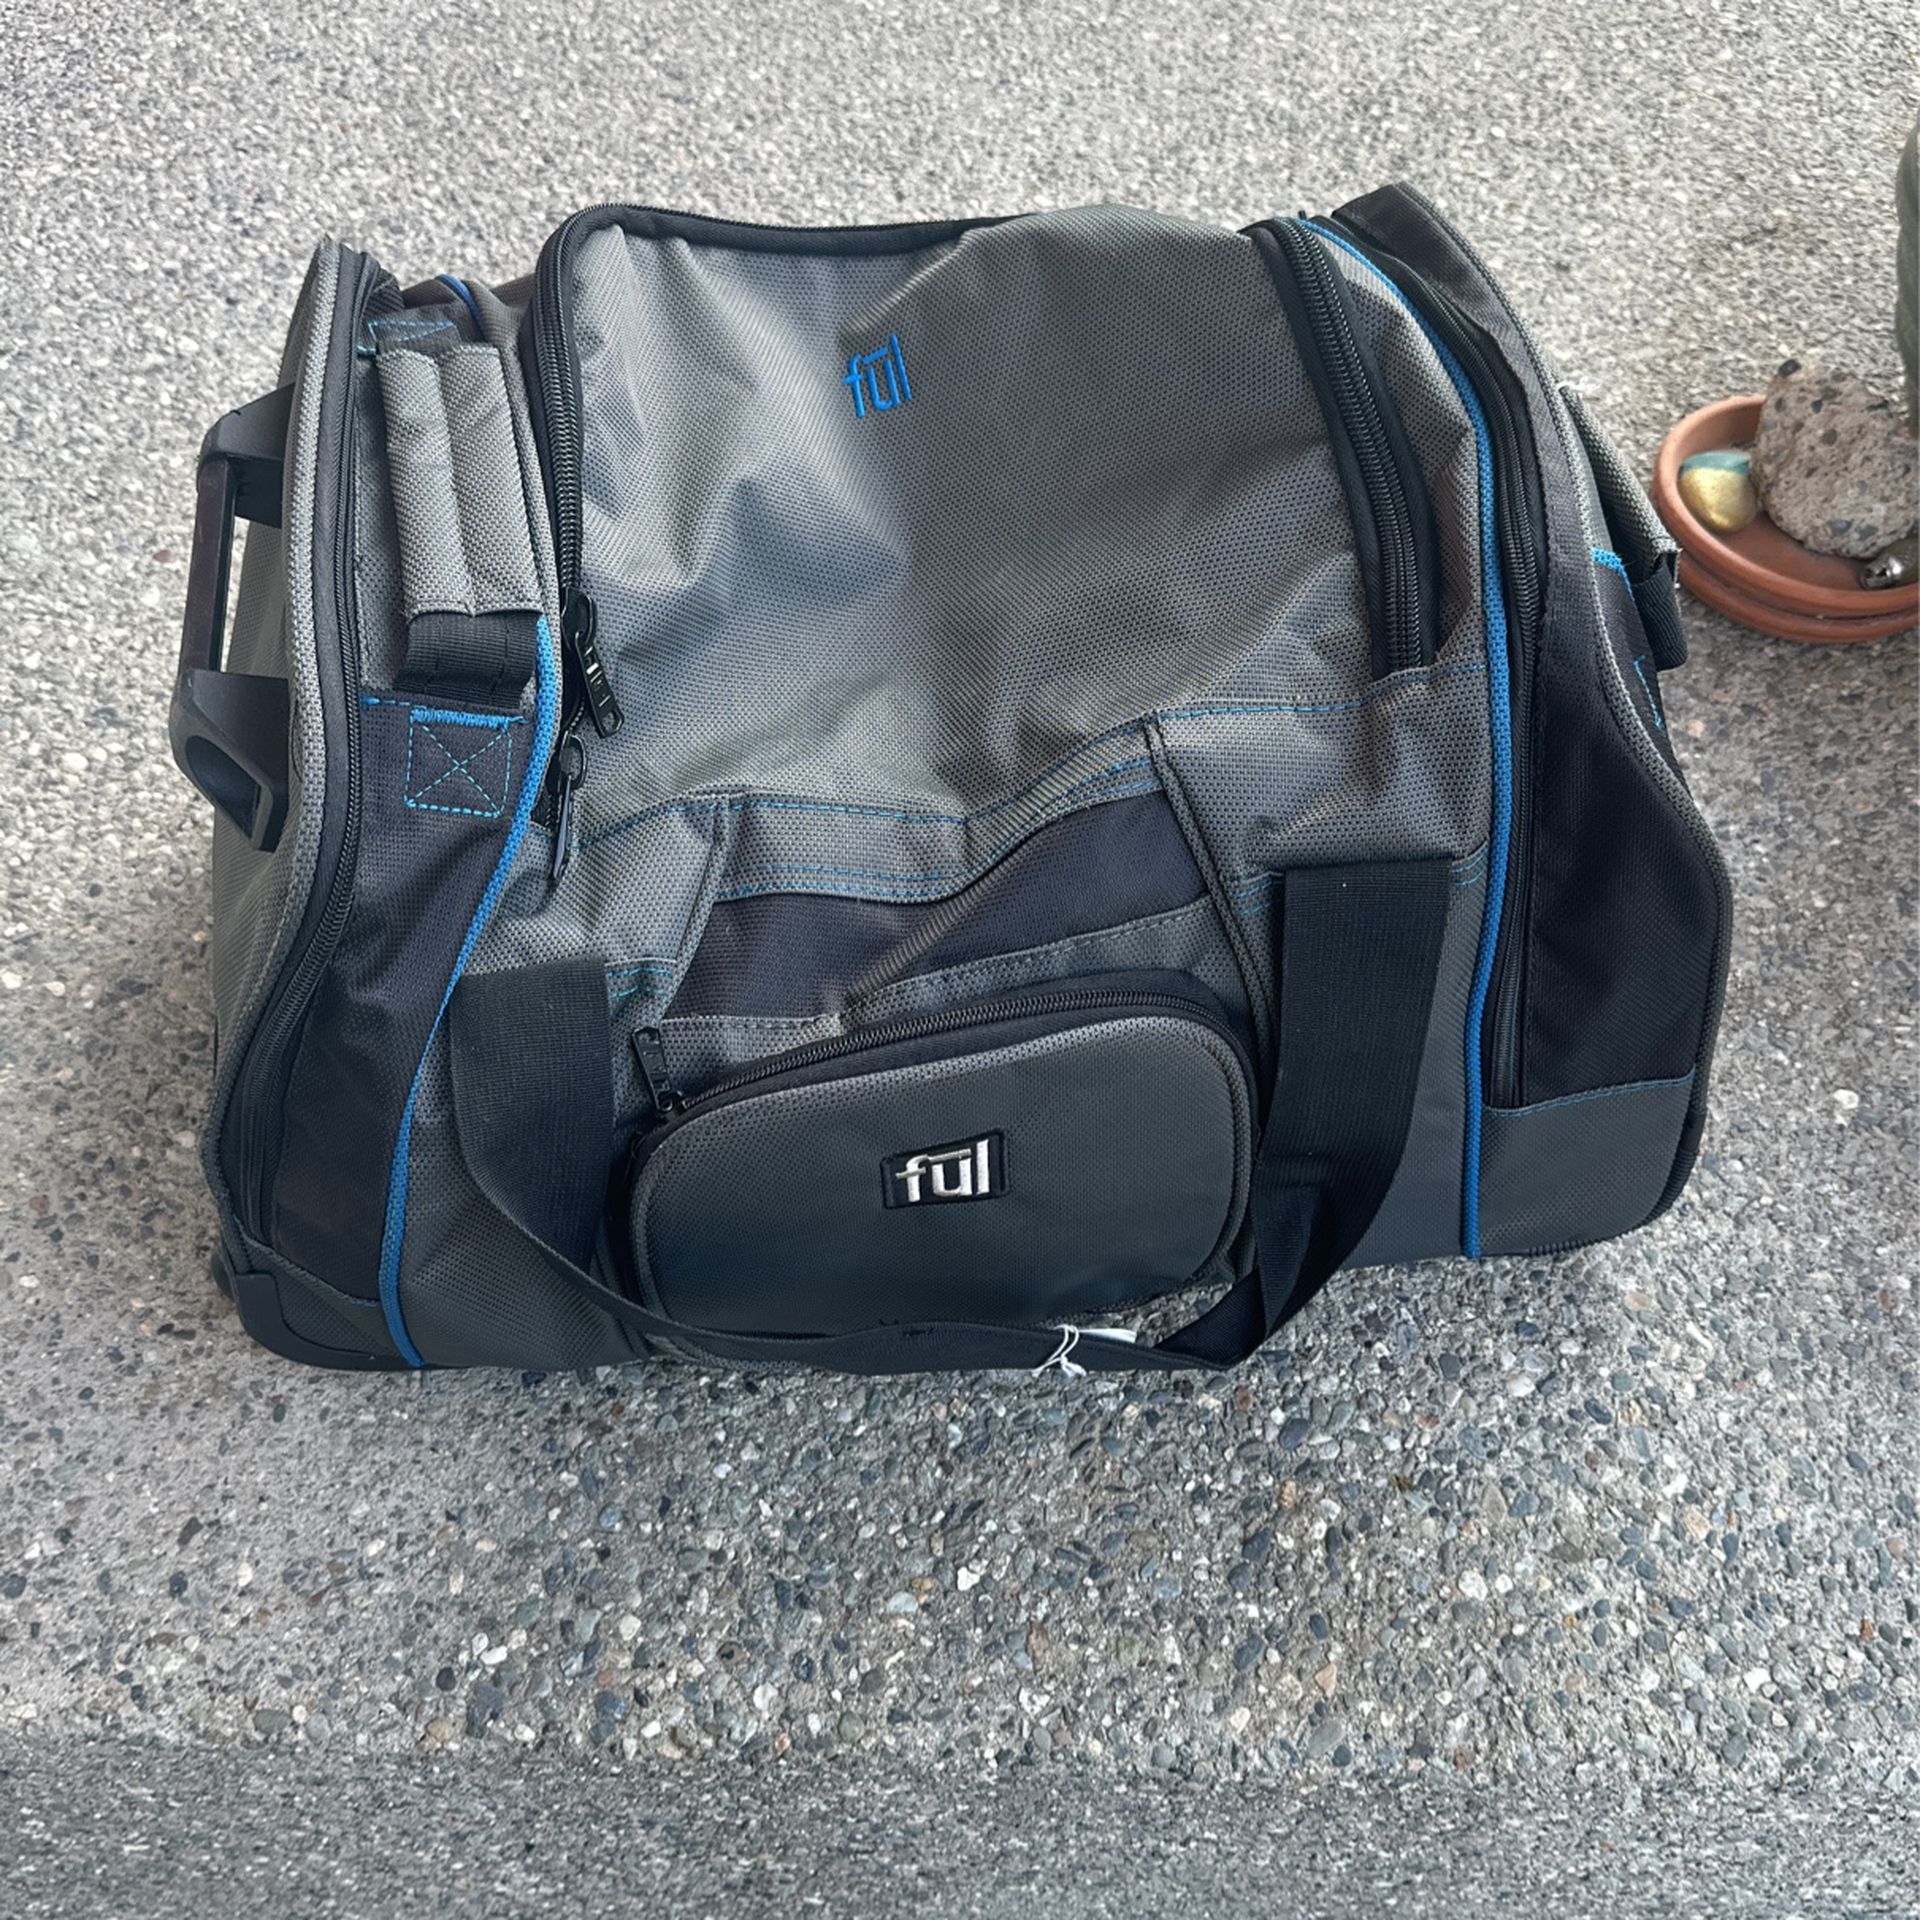 Ful Duffle Bag With Wheels And Handle